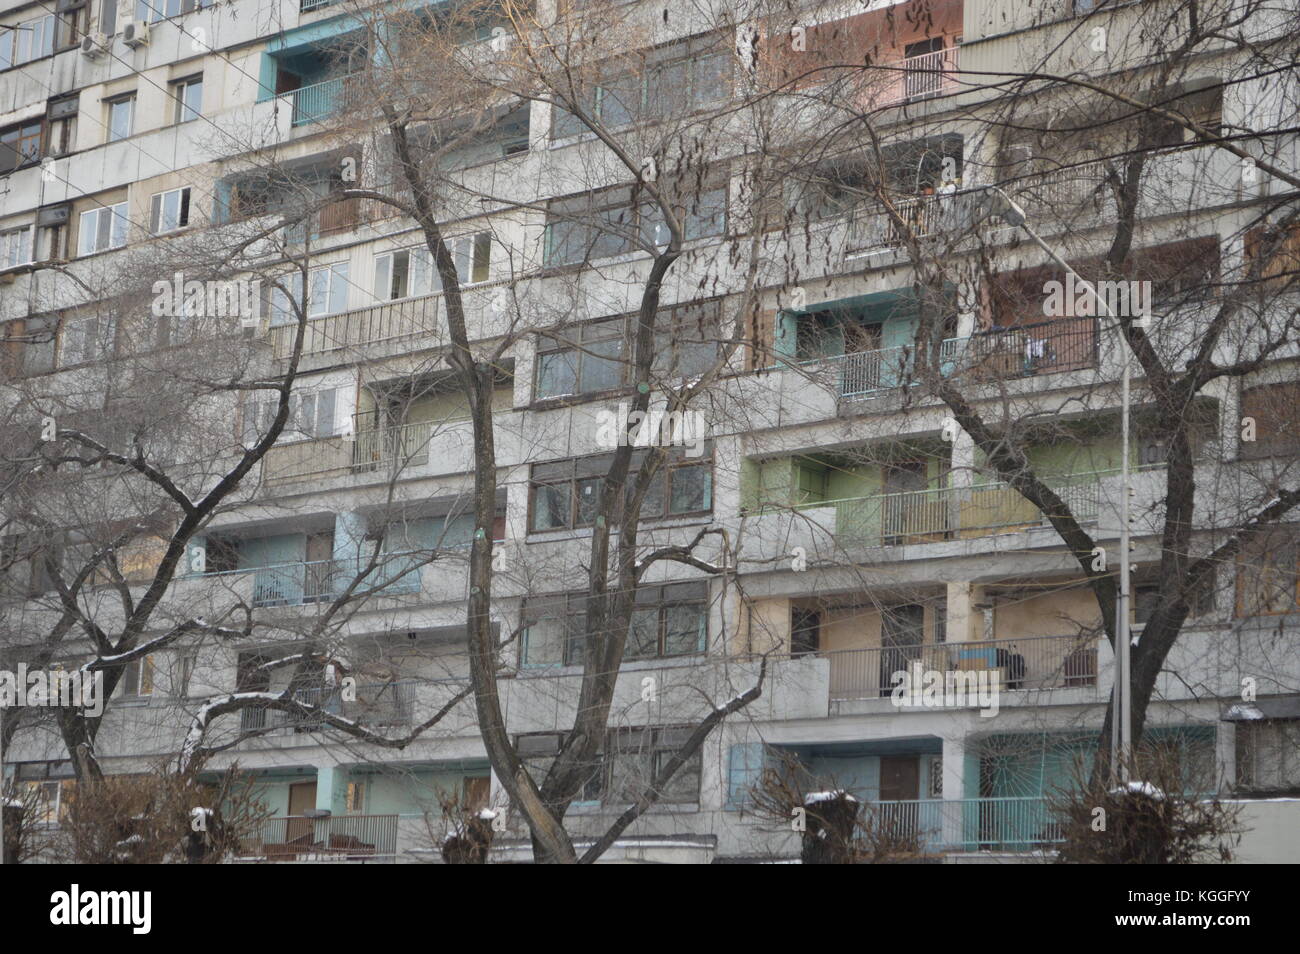 Communist apartment building with snowy trees and coloured balconies. Almaty, Kazakhstan Stock Photo